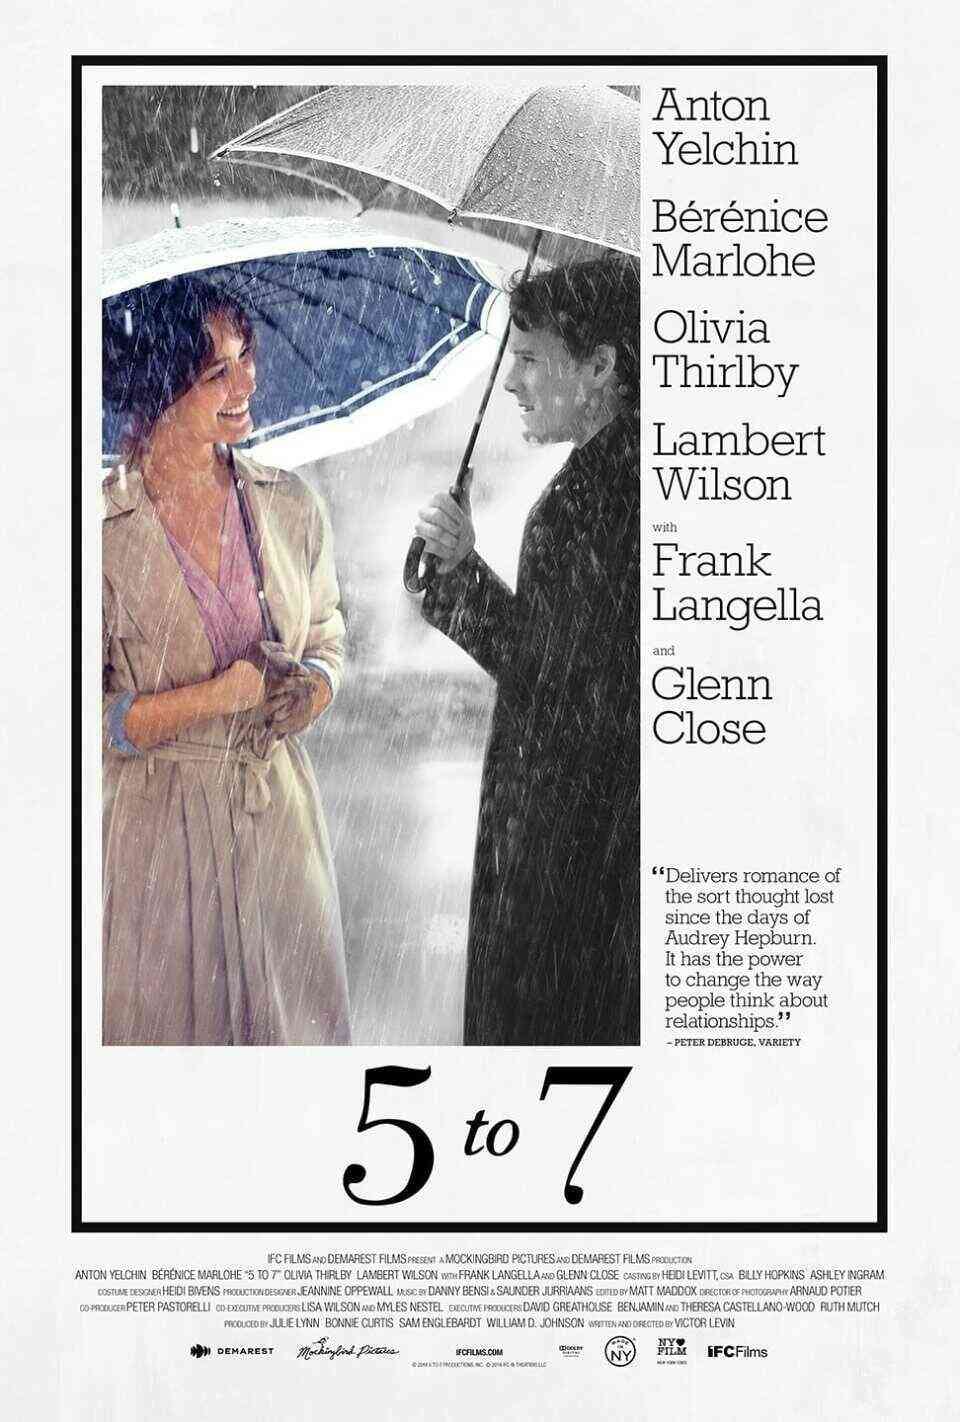 Read 5 to 7 screenplay (poster)